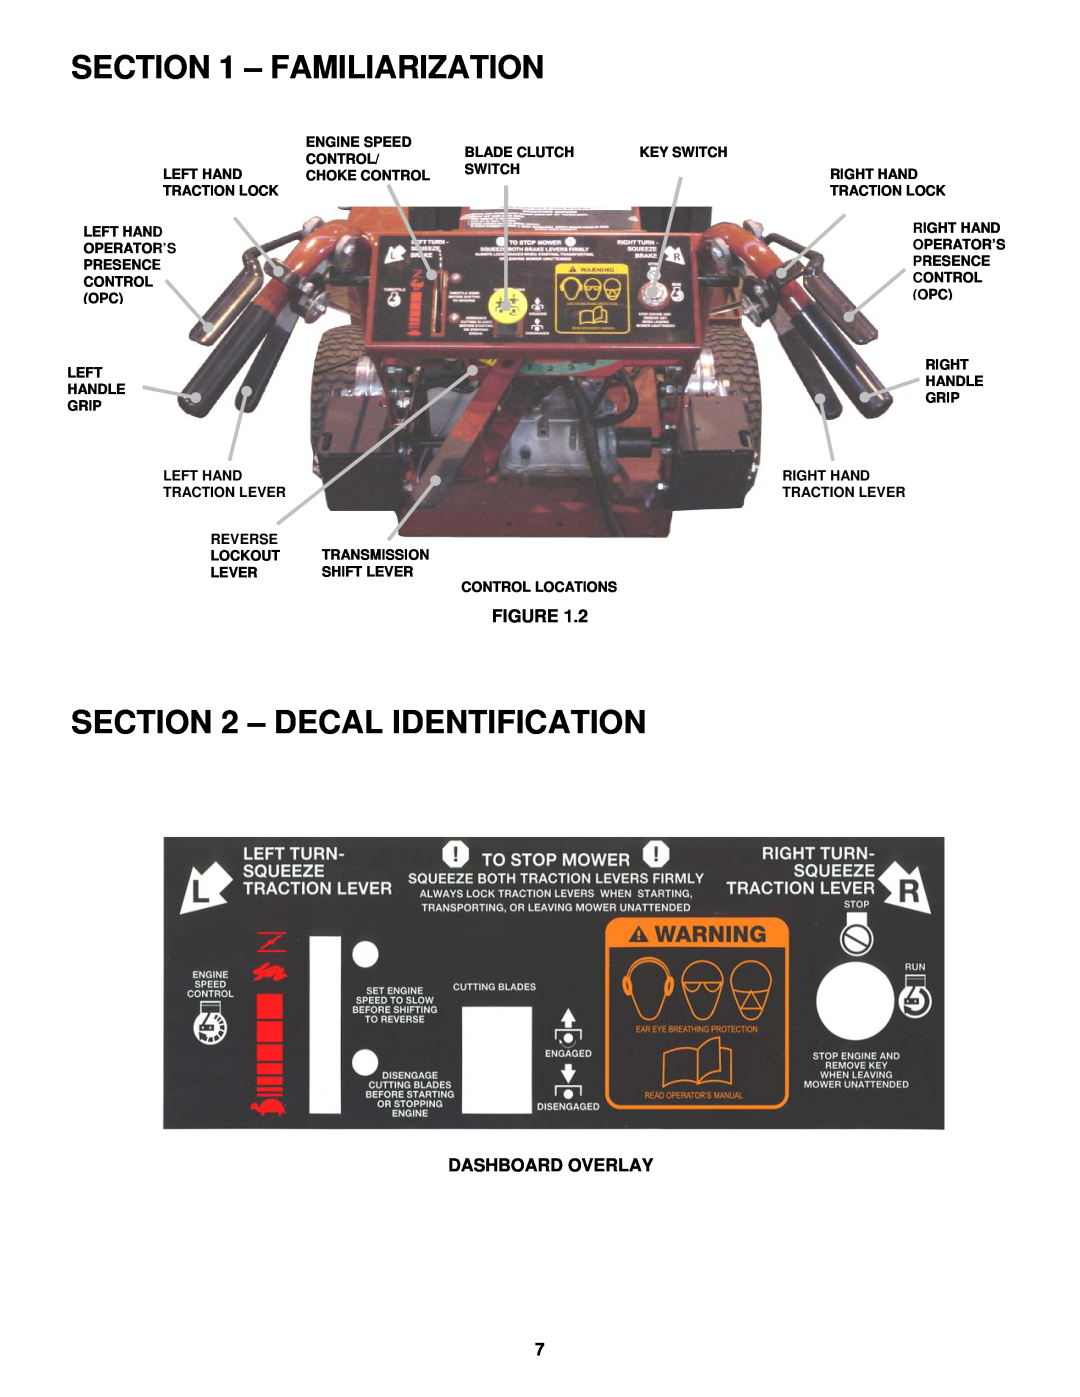 Snapper SGV13321KW important safety instructions Decal Identification, Familiarization, Dashboard Overlay 